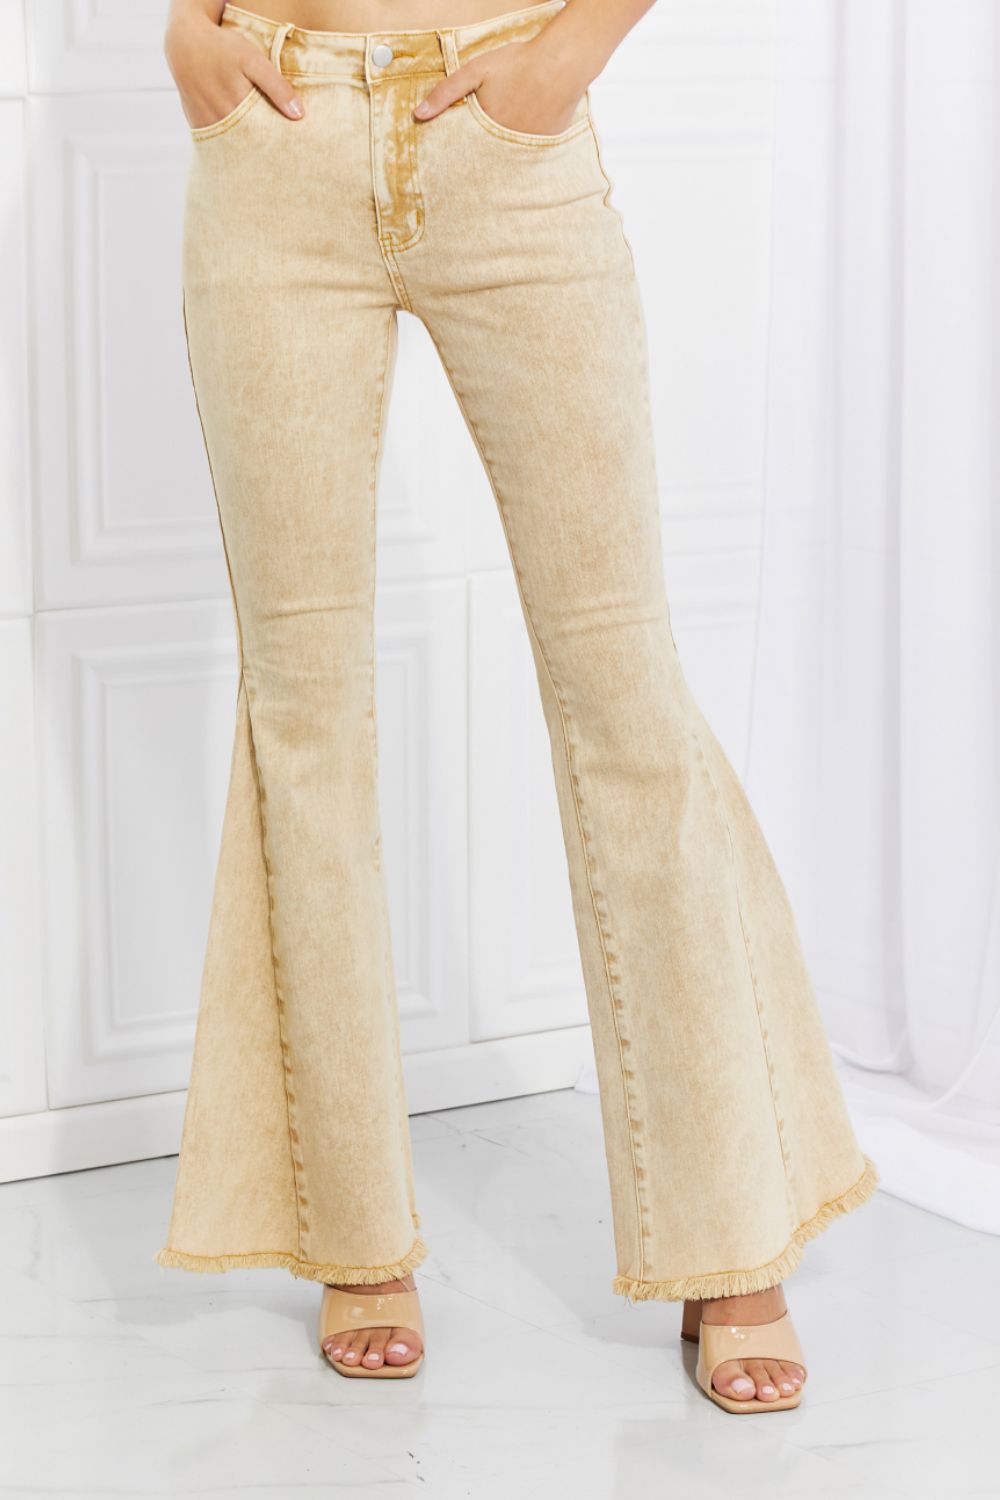 Color Theory Flip Side Fray Hem Bell Bottom Jeans in Yellow Posh Styles Apparel